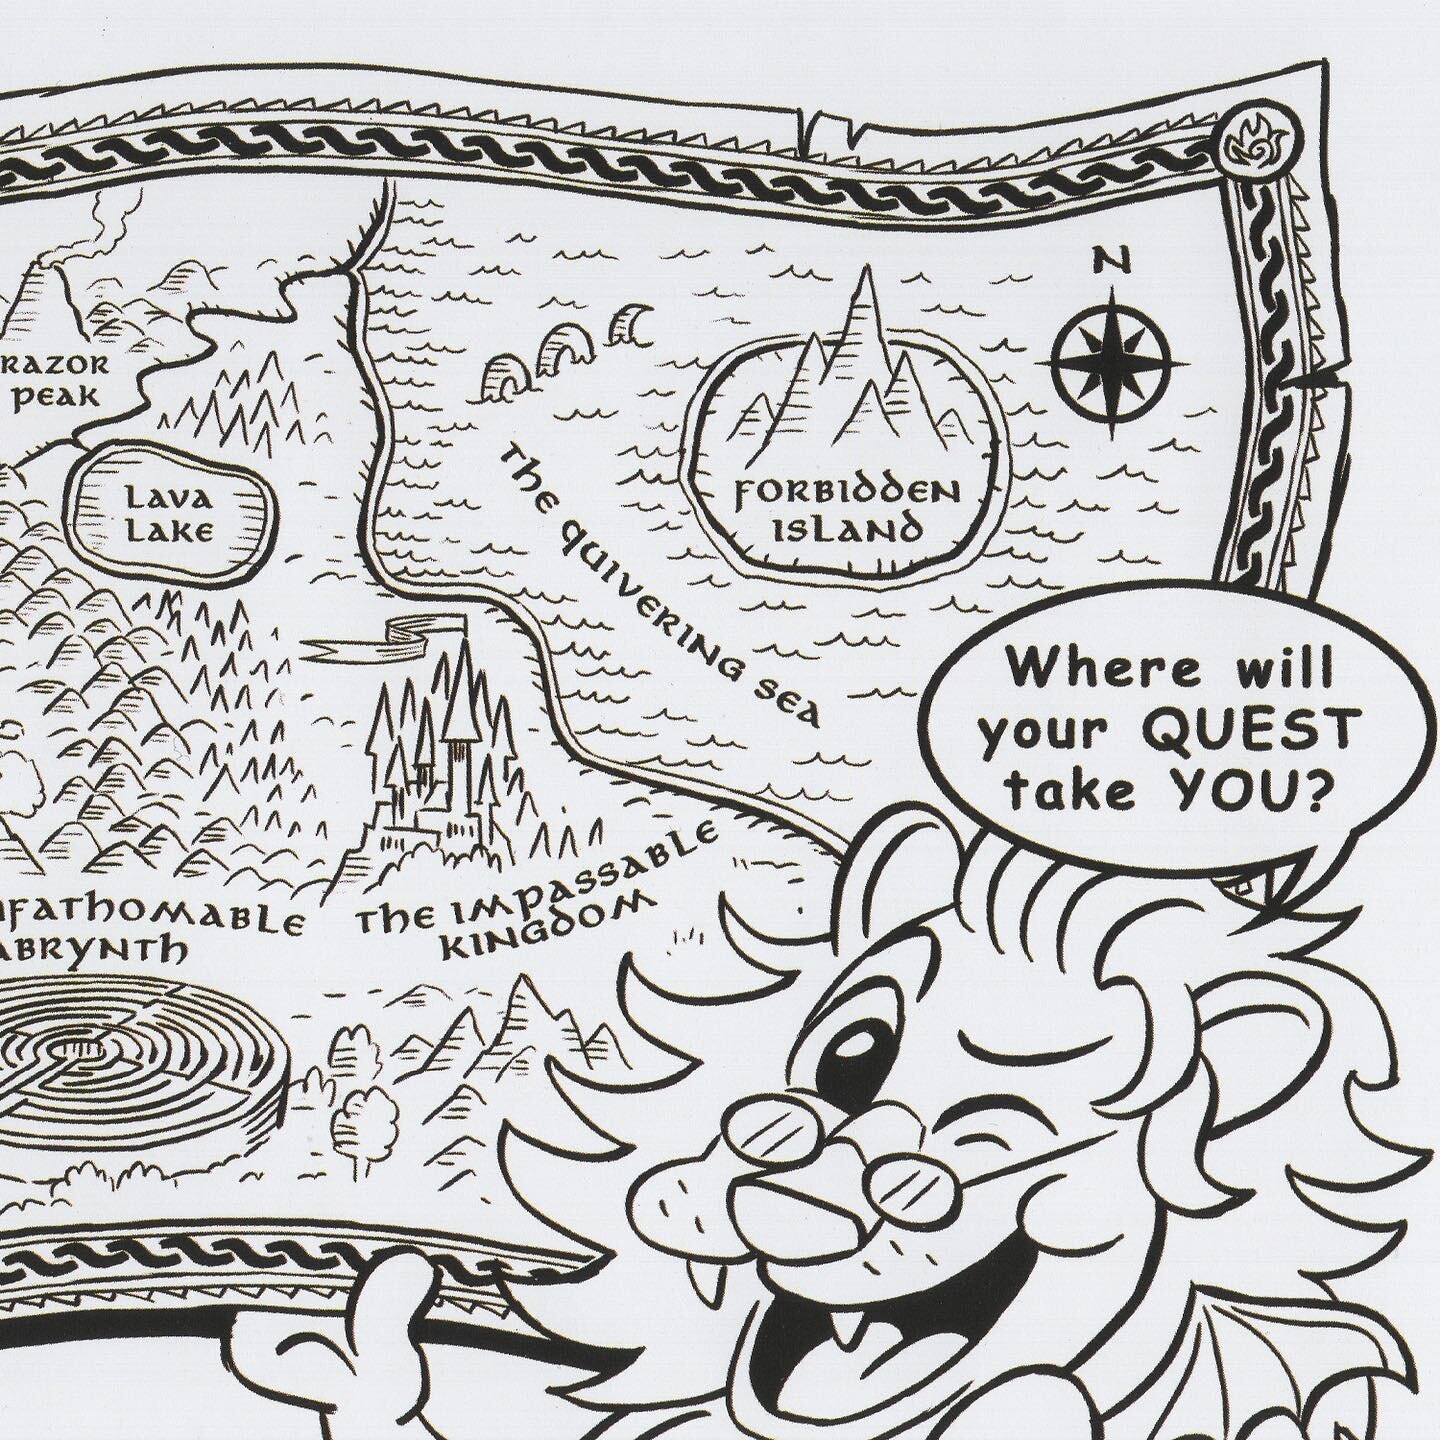 Detail of a concept design of the Manticore&rsquo;s adventure map for Pixar&rsquo;s Onward by Kelsey Mann.

It&rsquo;s important to note that the path to adventure can be found even in the most unexpected places &mdash; including the fantasy map on y